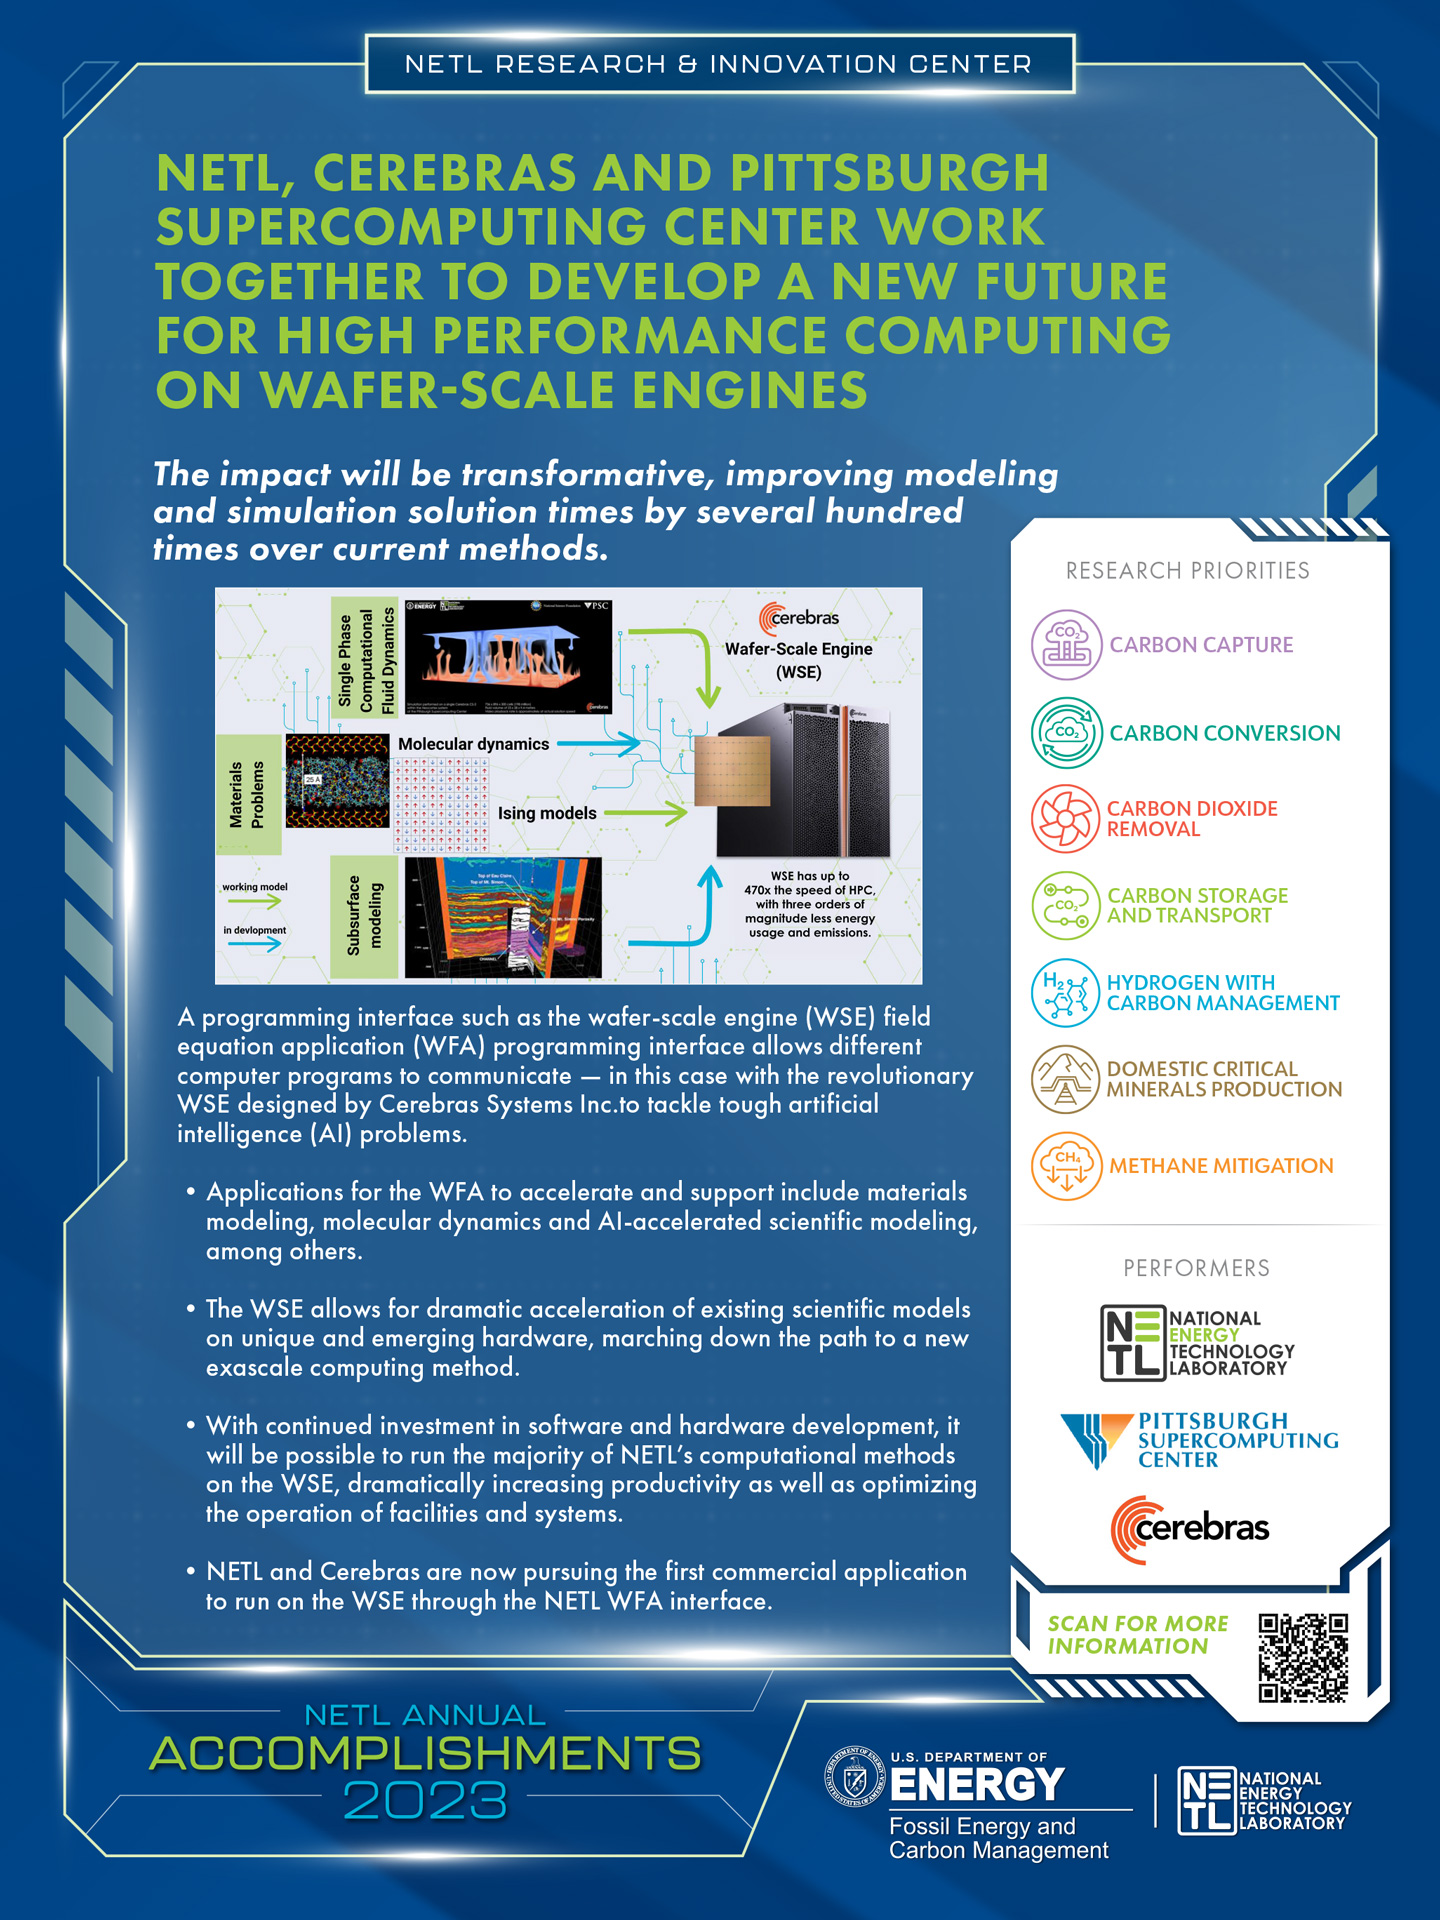 NETL, Cerebras and Pittsburgh Supercomputing Center Work Together to Develop A New Future for High Performance Computing on Wafer-Scale Engines